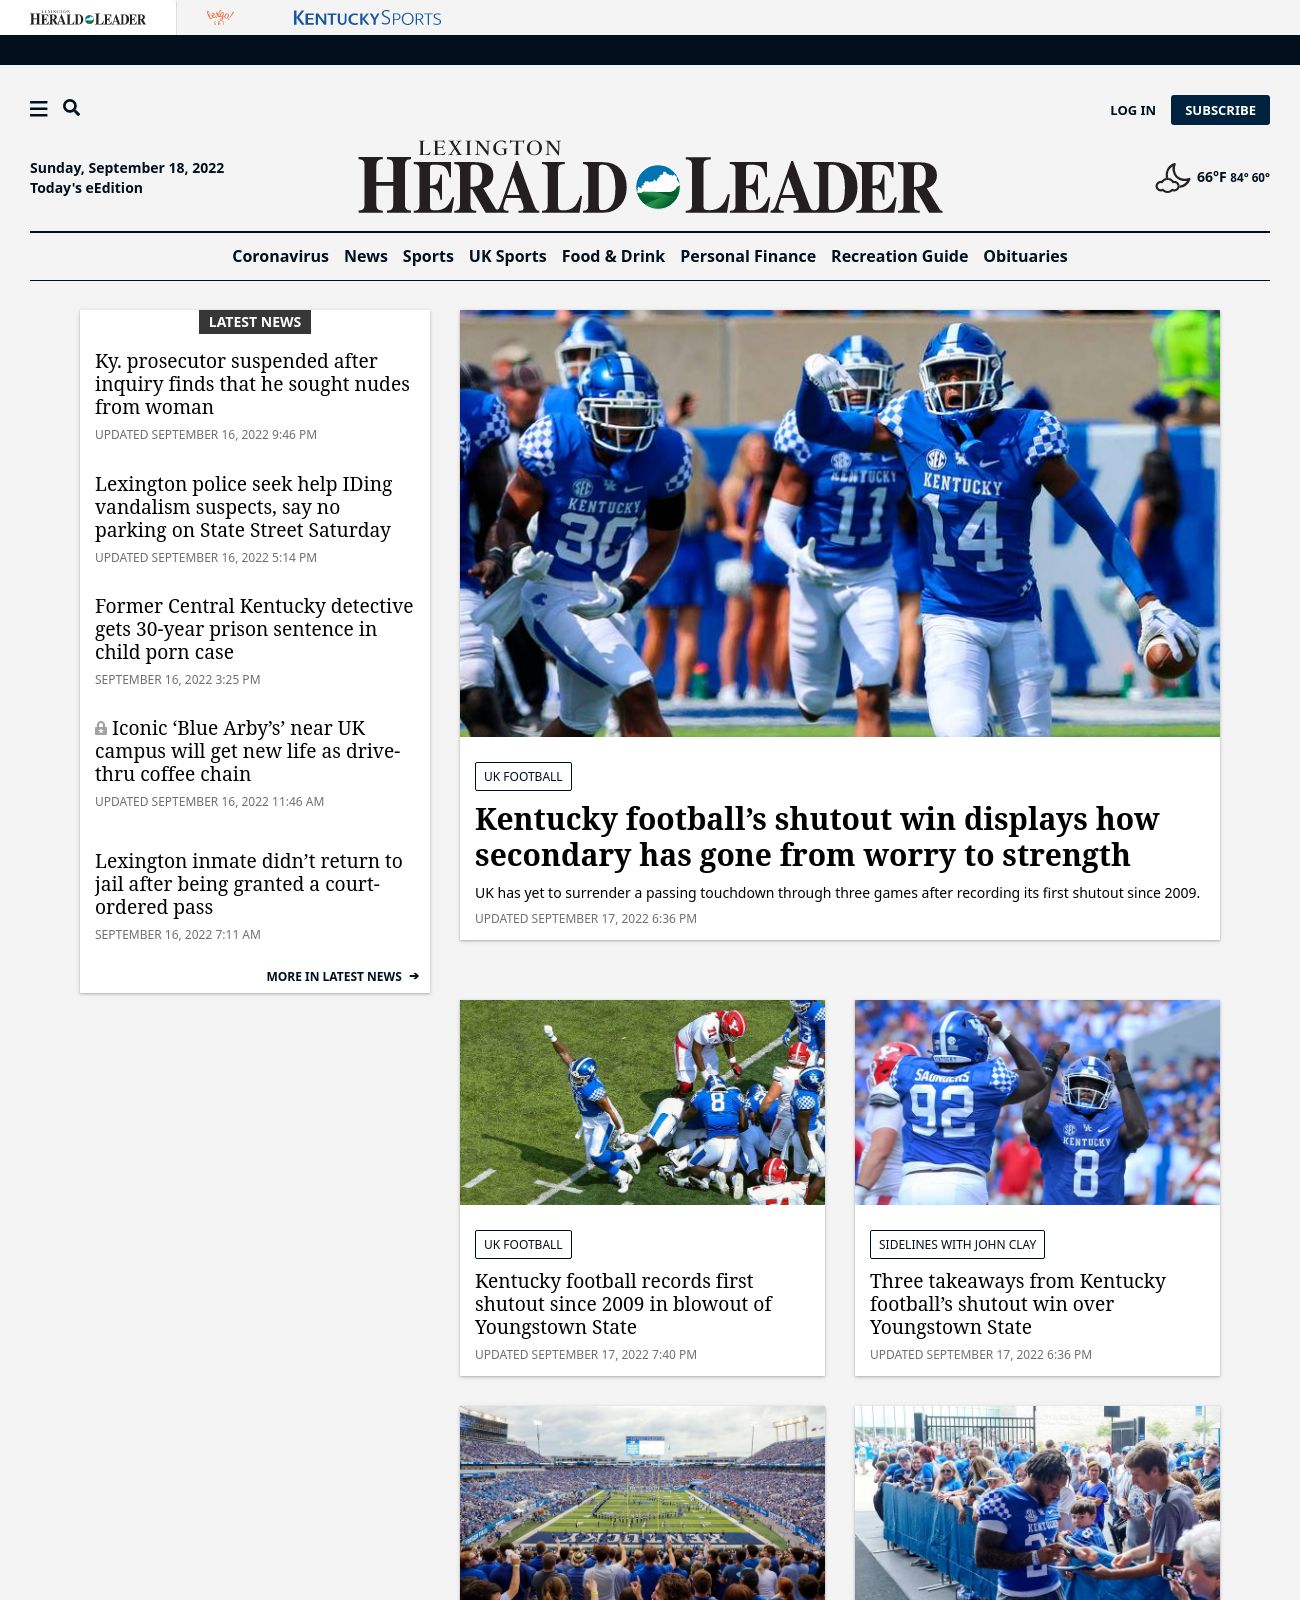 Lexington Herald-Leader at 2022-09-17 23:51:58-04:00 local time